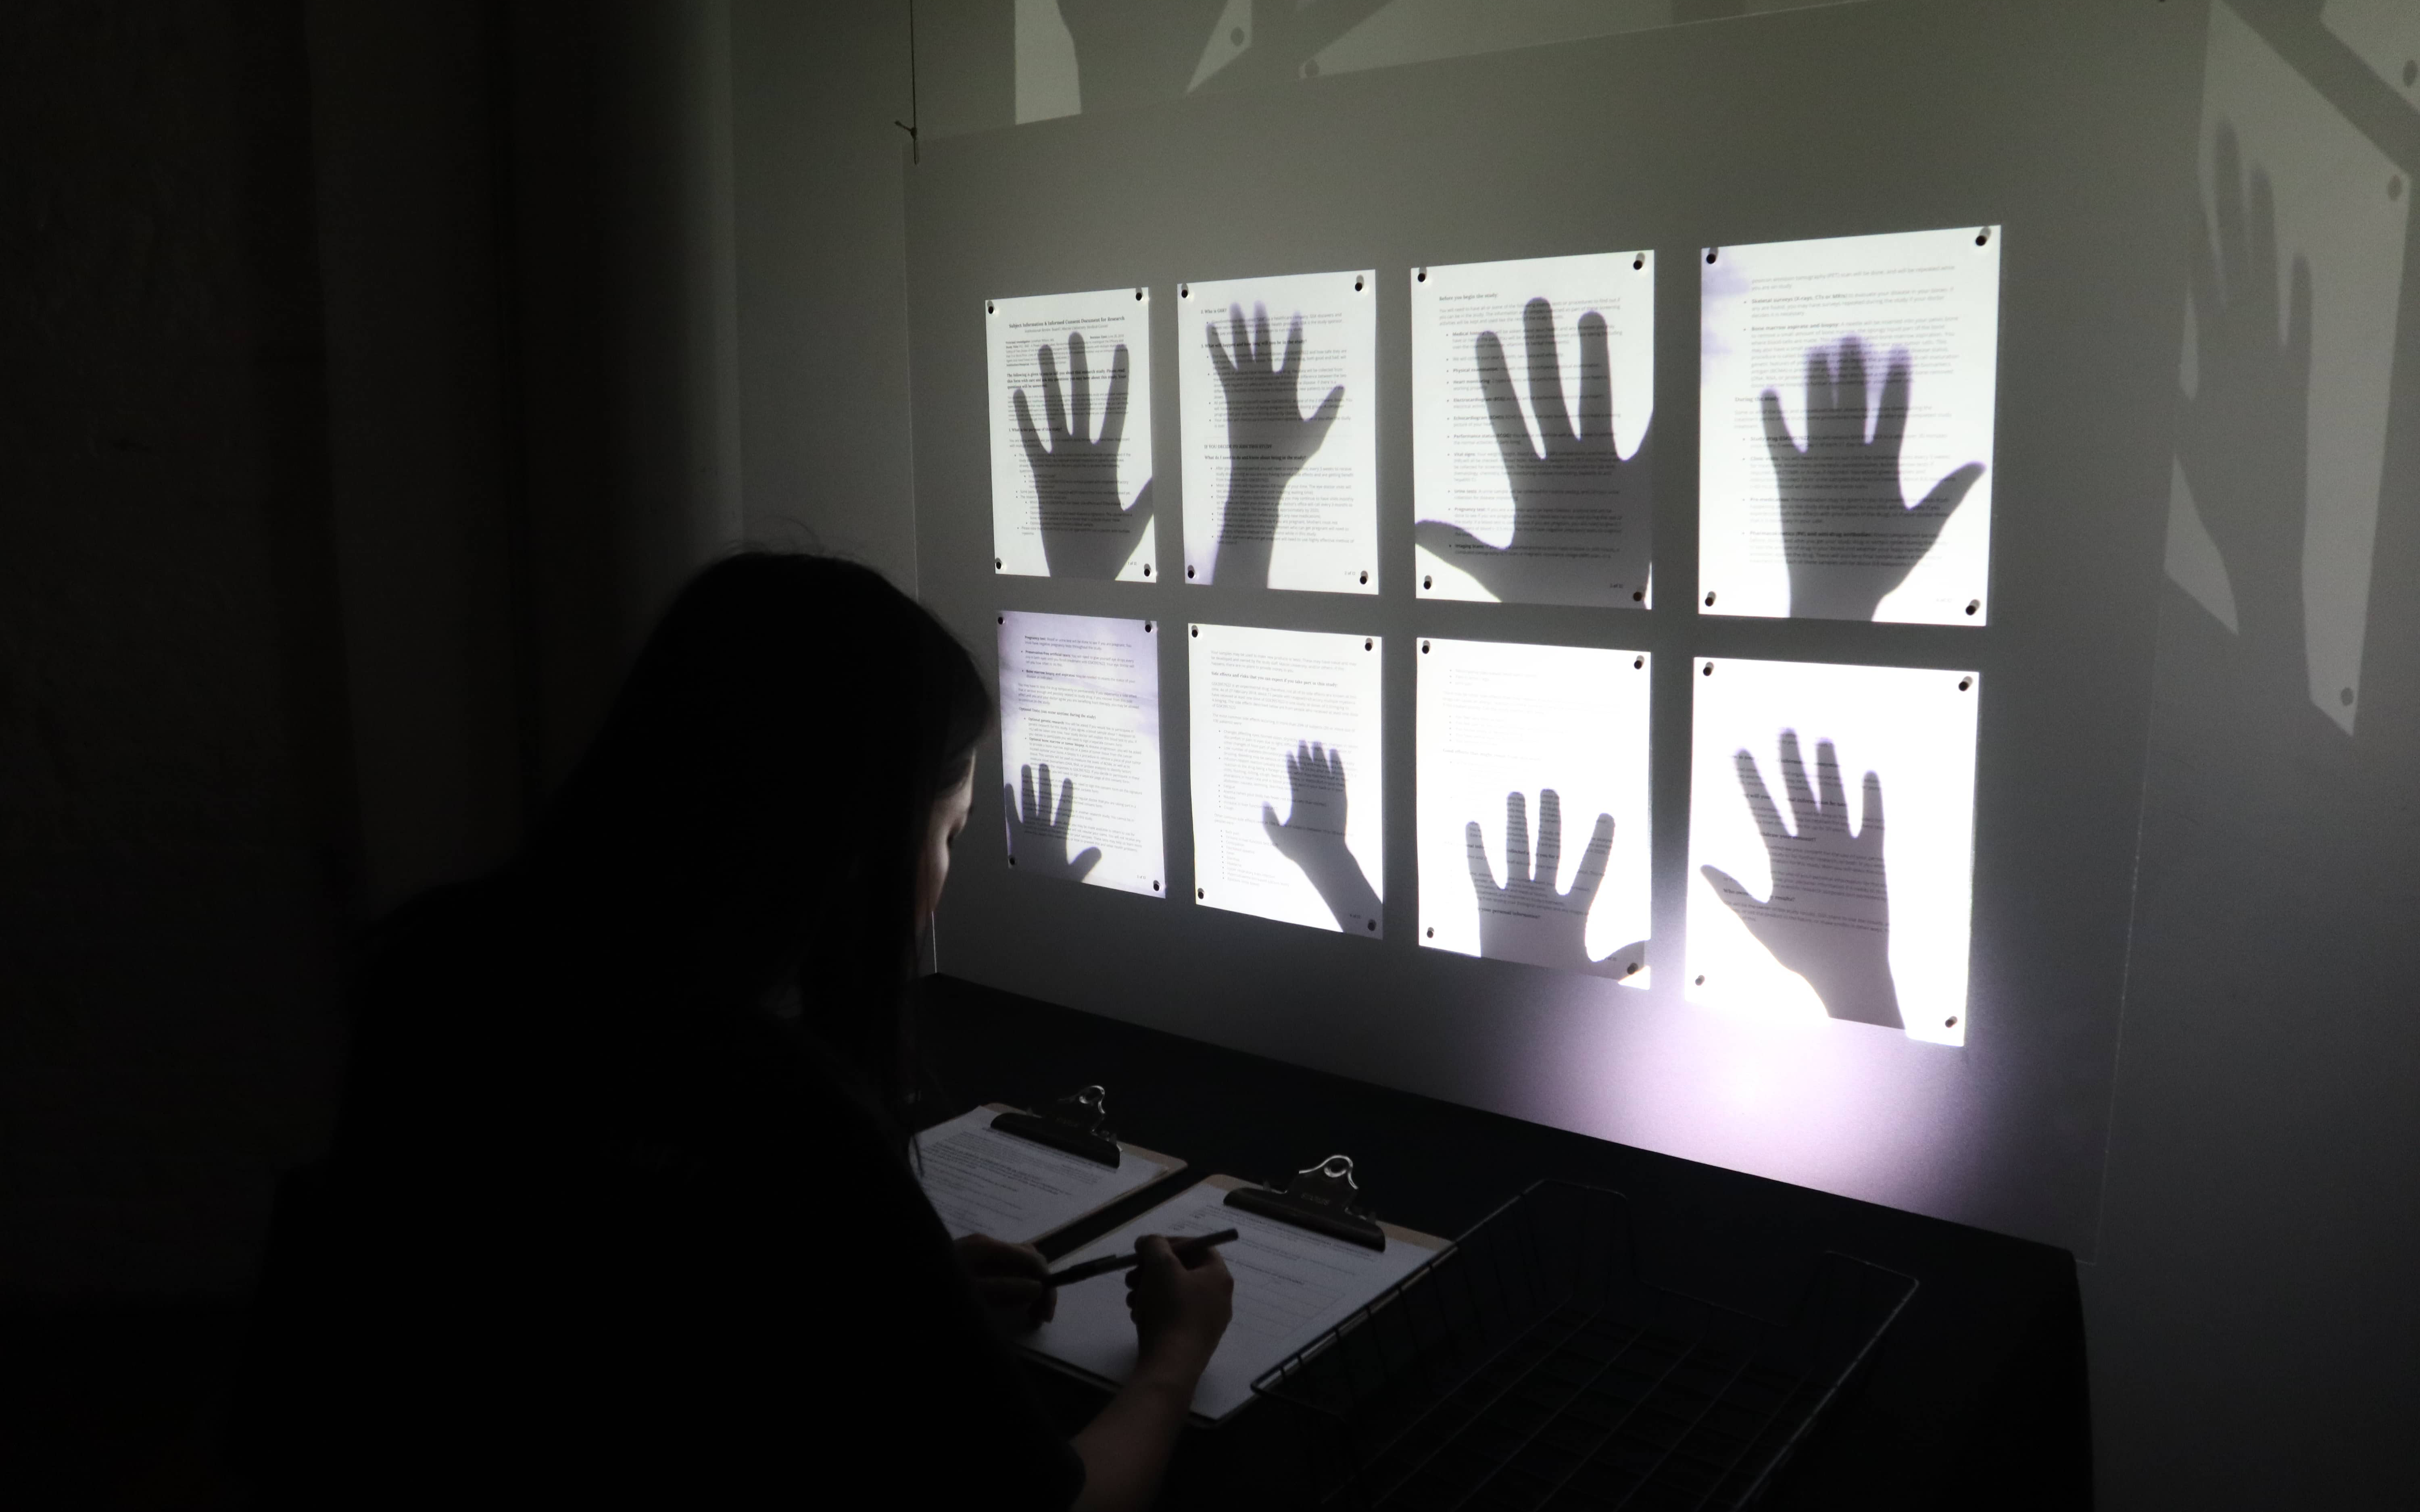 Shadows of hands shown behind pieces of paper on wall while person signs form